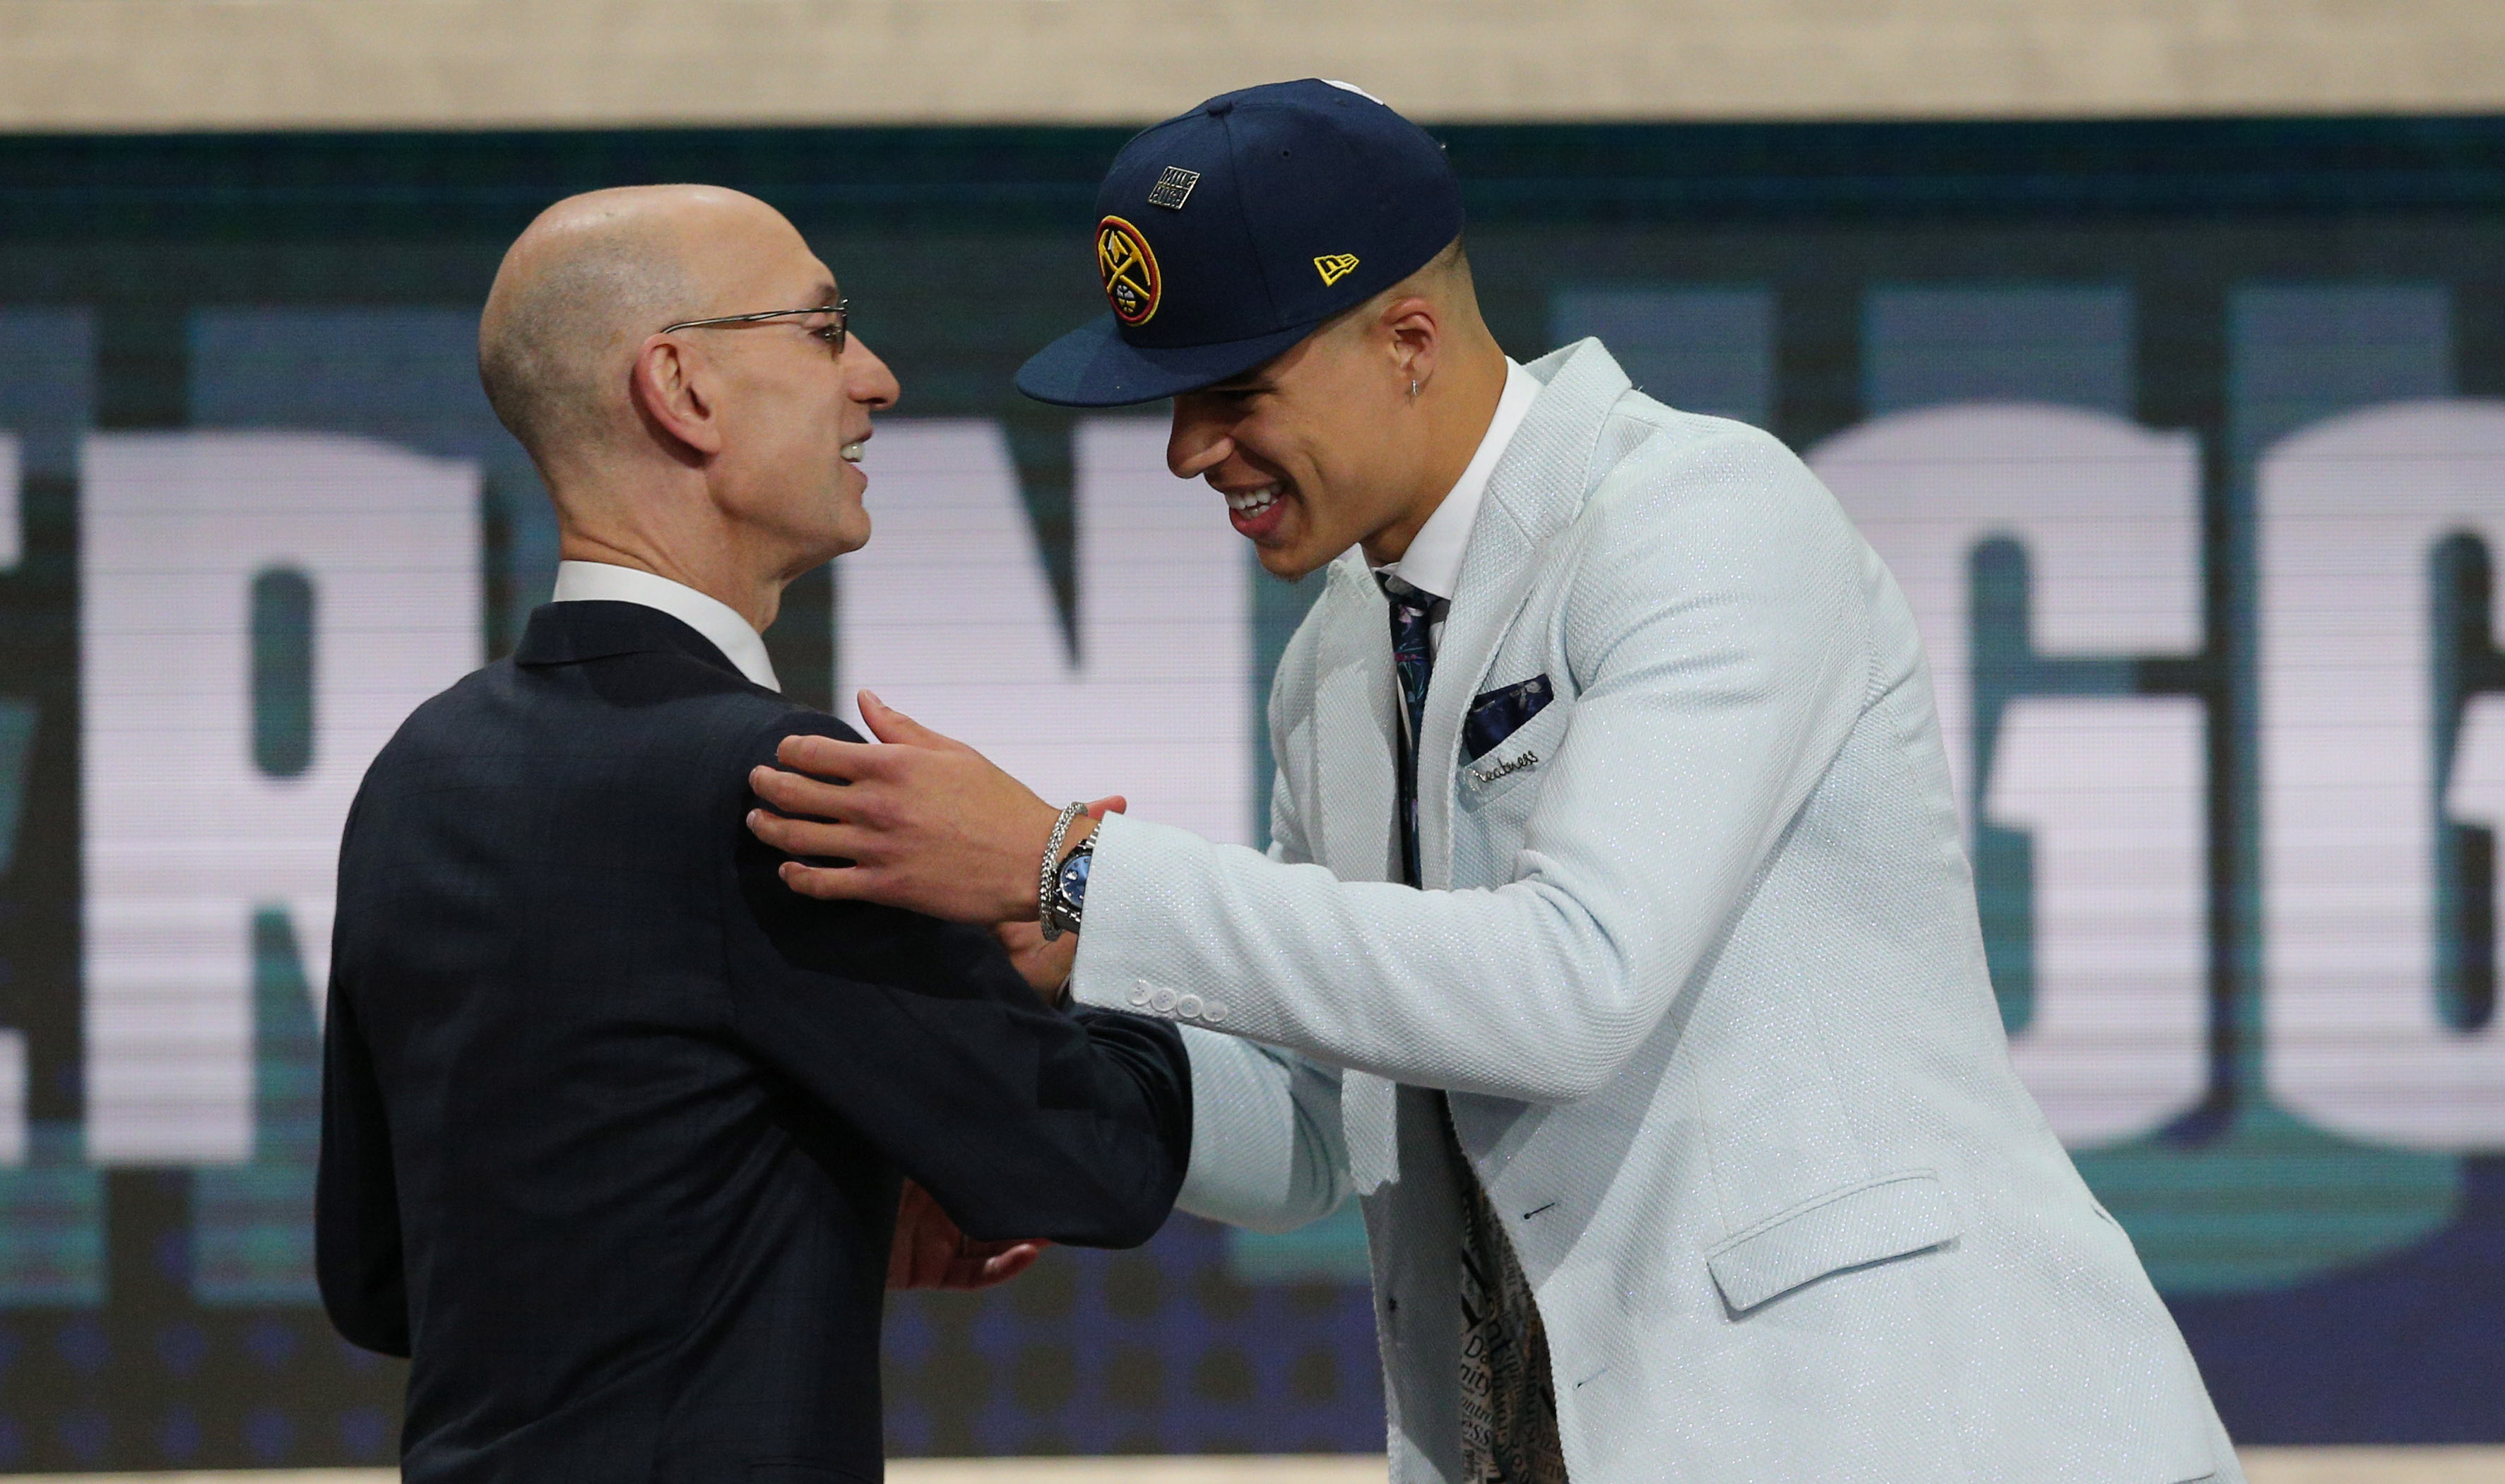 Michael Porter, Jr. (Missouri) greets NBA commissioner Adam Silver after being selected as the number fourteen overall pick to the Denver Nuggets in the first round of the 2018 NBA Draft at the Barclays Center.